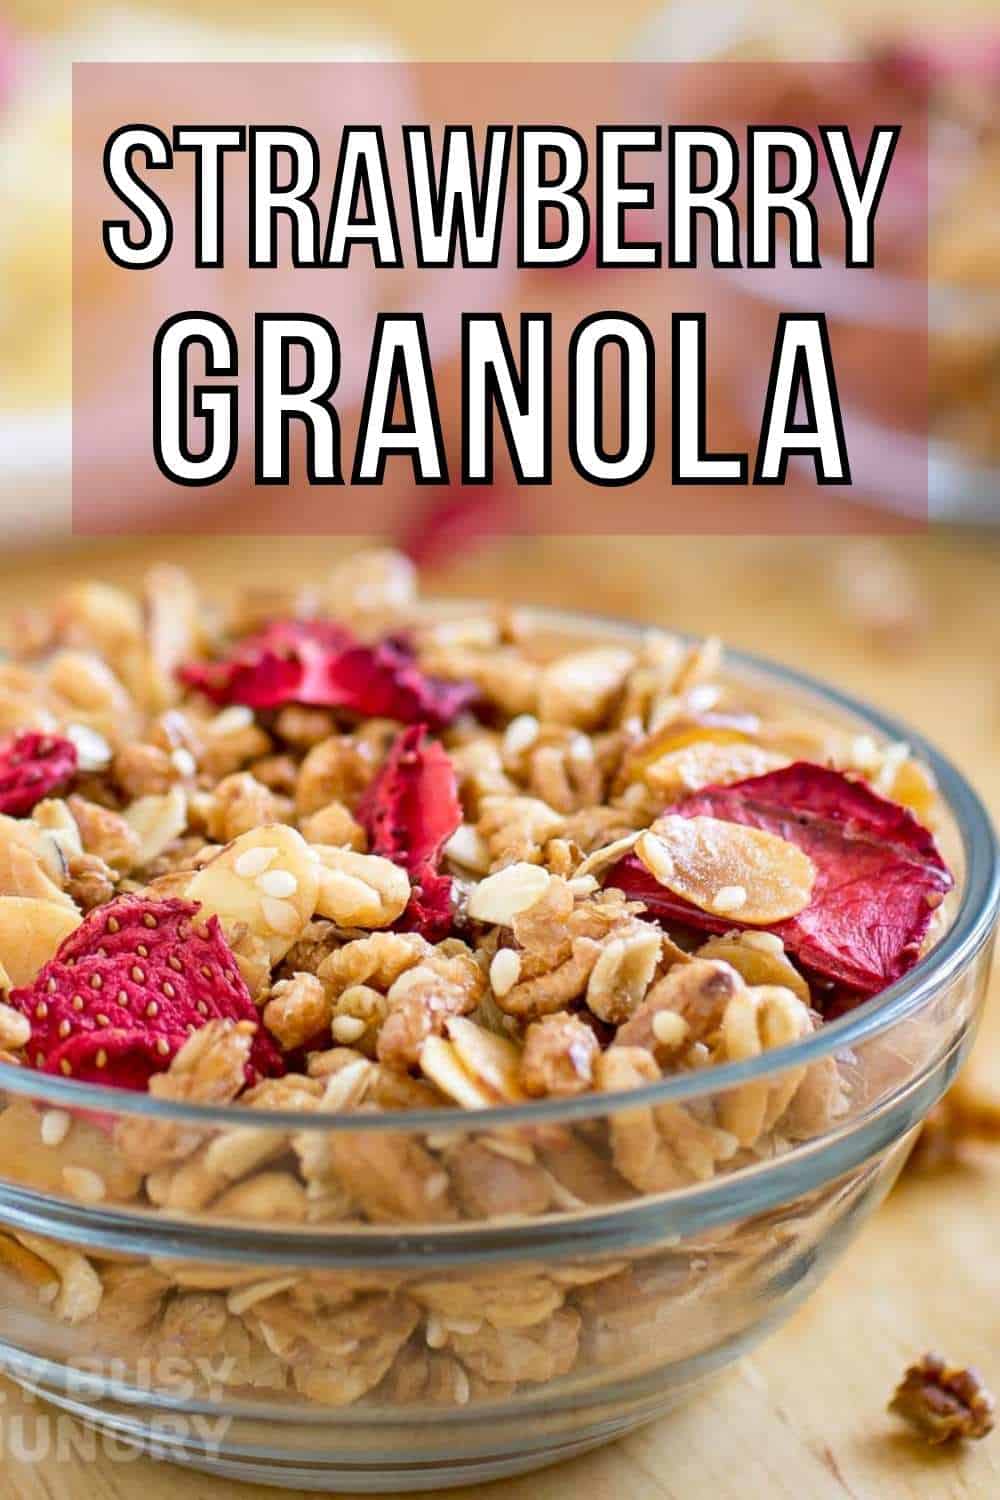 Side view of granola and strawberries in a clear bowl on a wooden surface with more granola in the background.